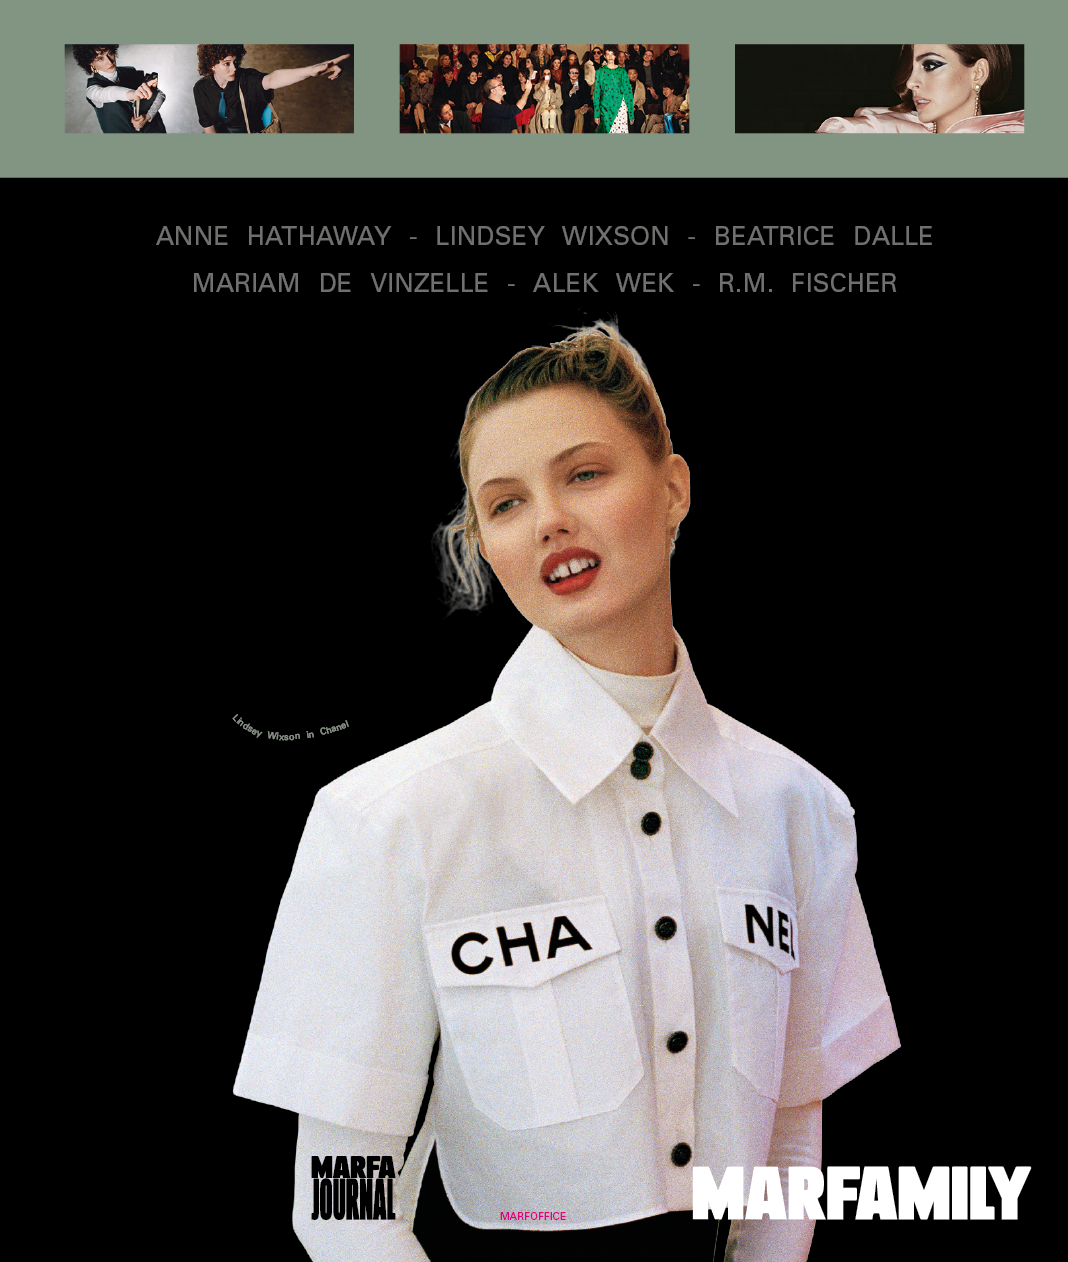 Model Lindsey Wixson wearing a chanel look on the cover of the fashion magazine marfa journal